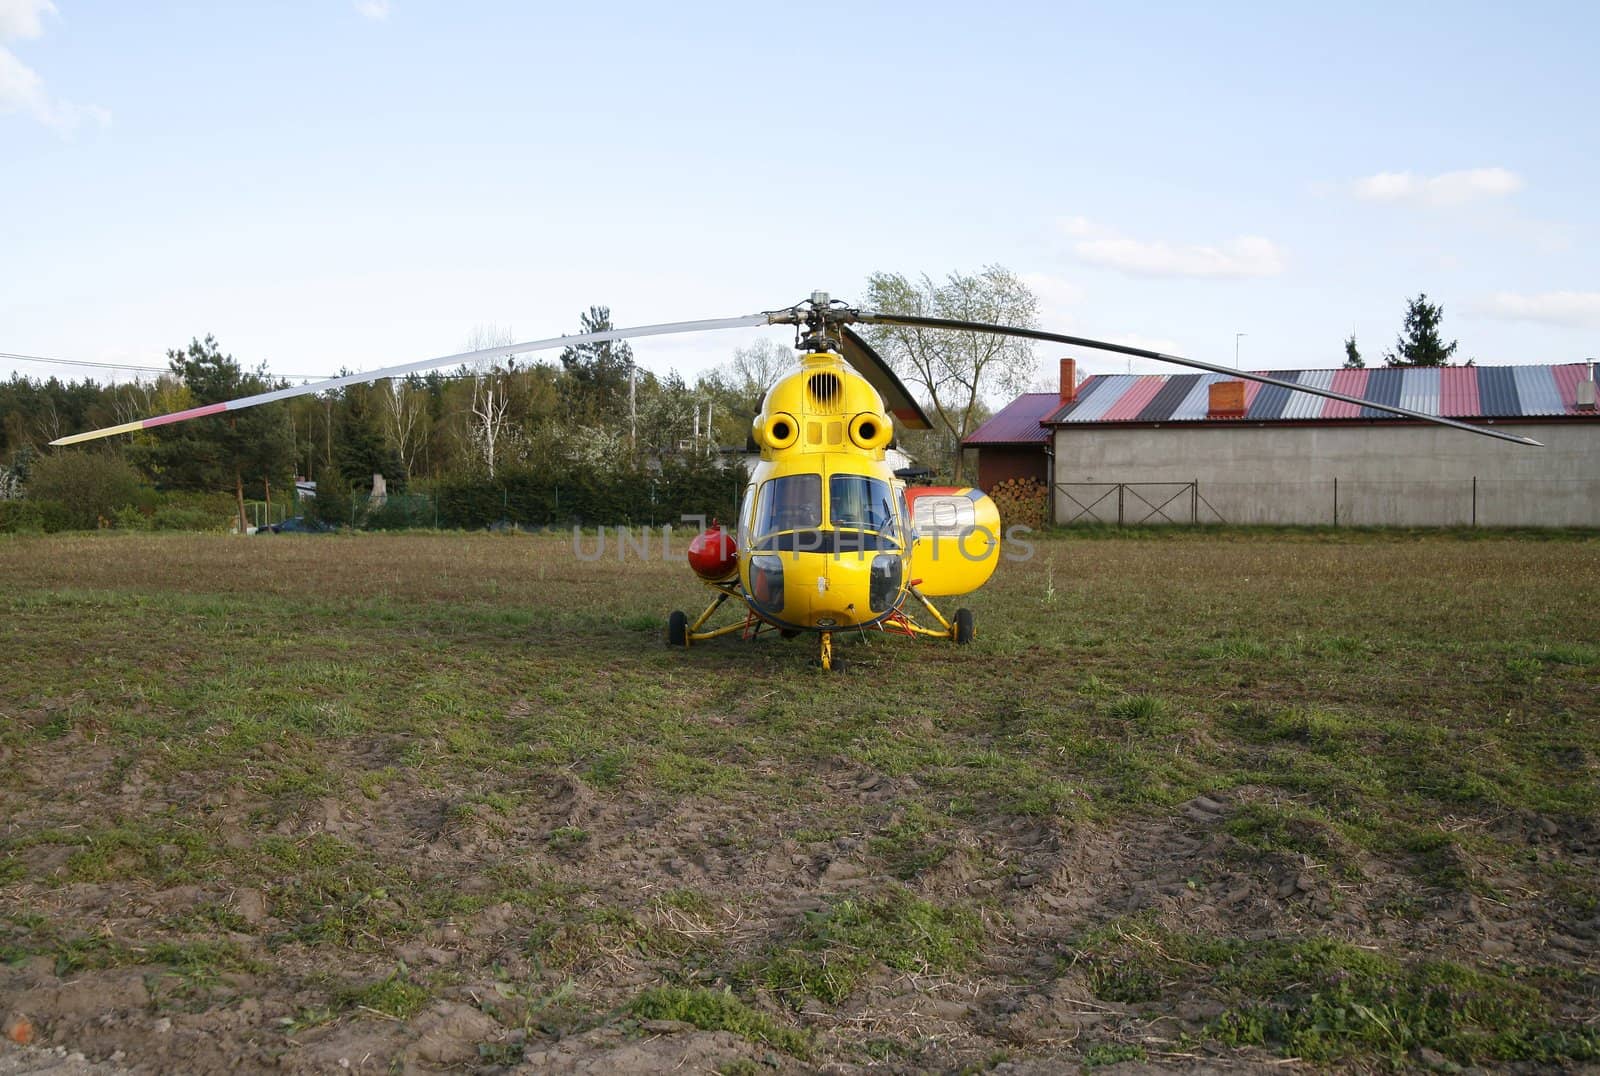 front of rescue helicopter landed on the grassy field